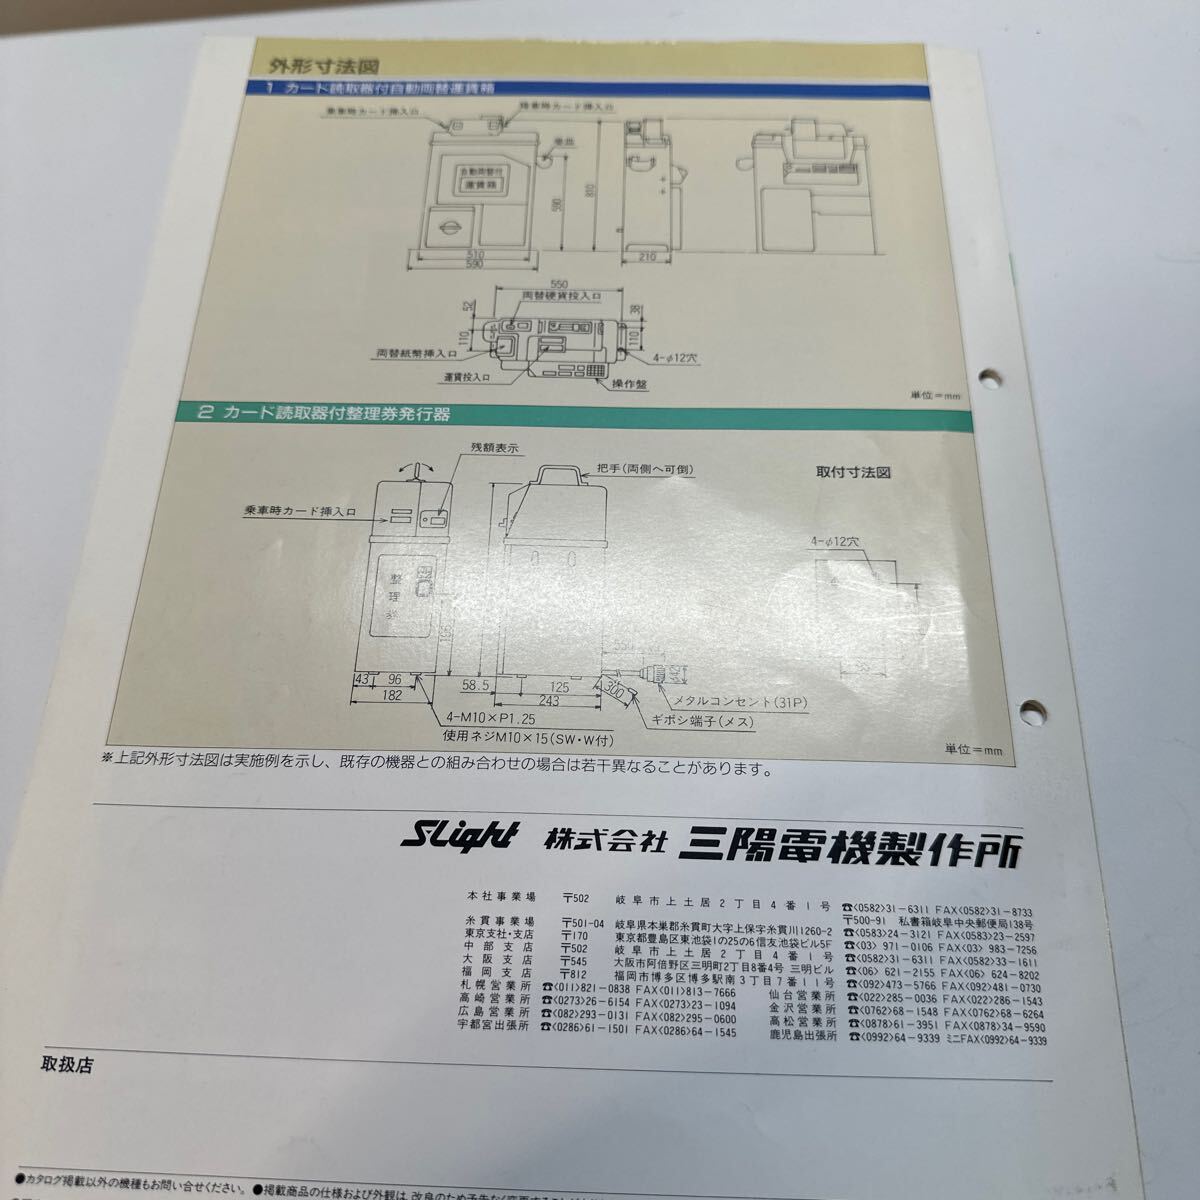 es light bus card system pamphlet [1988 year ]